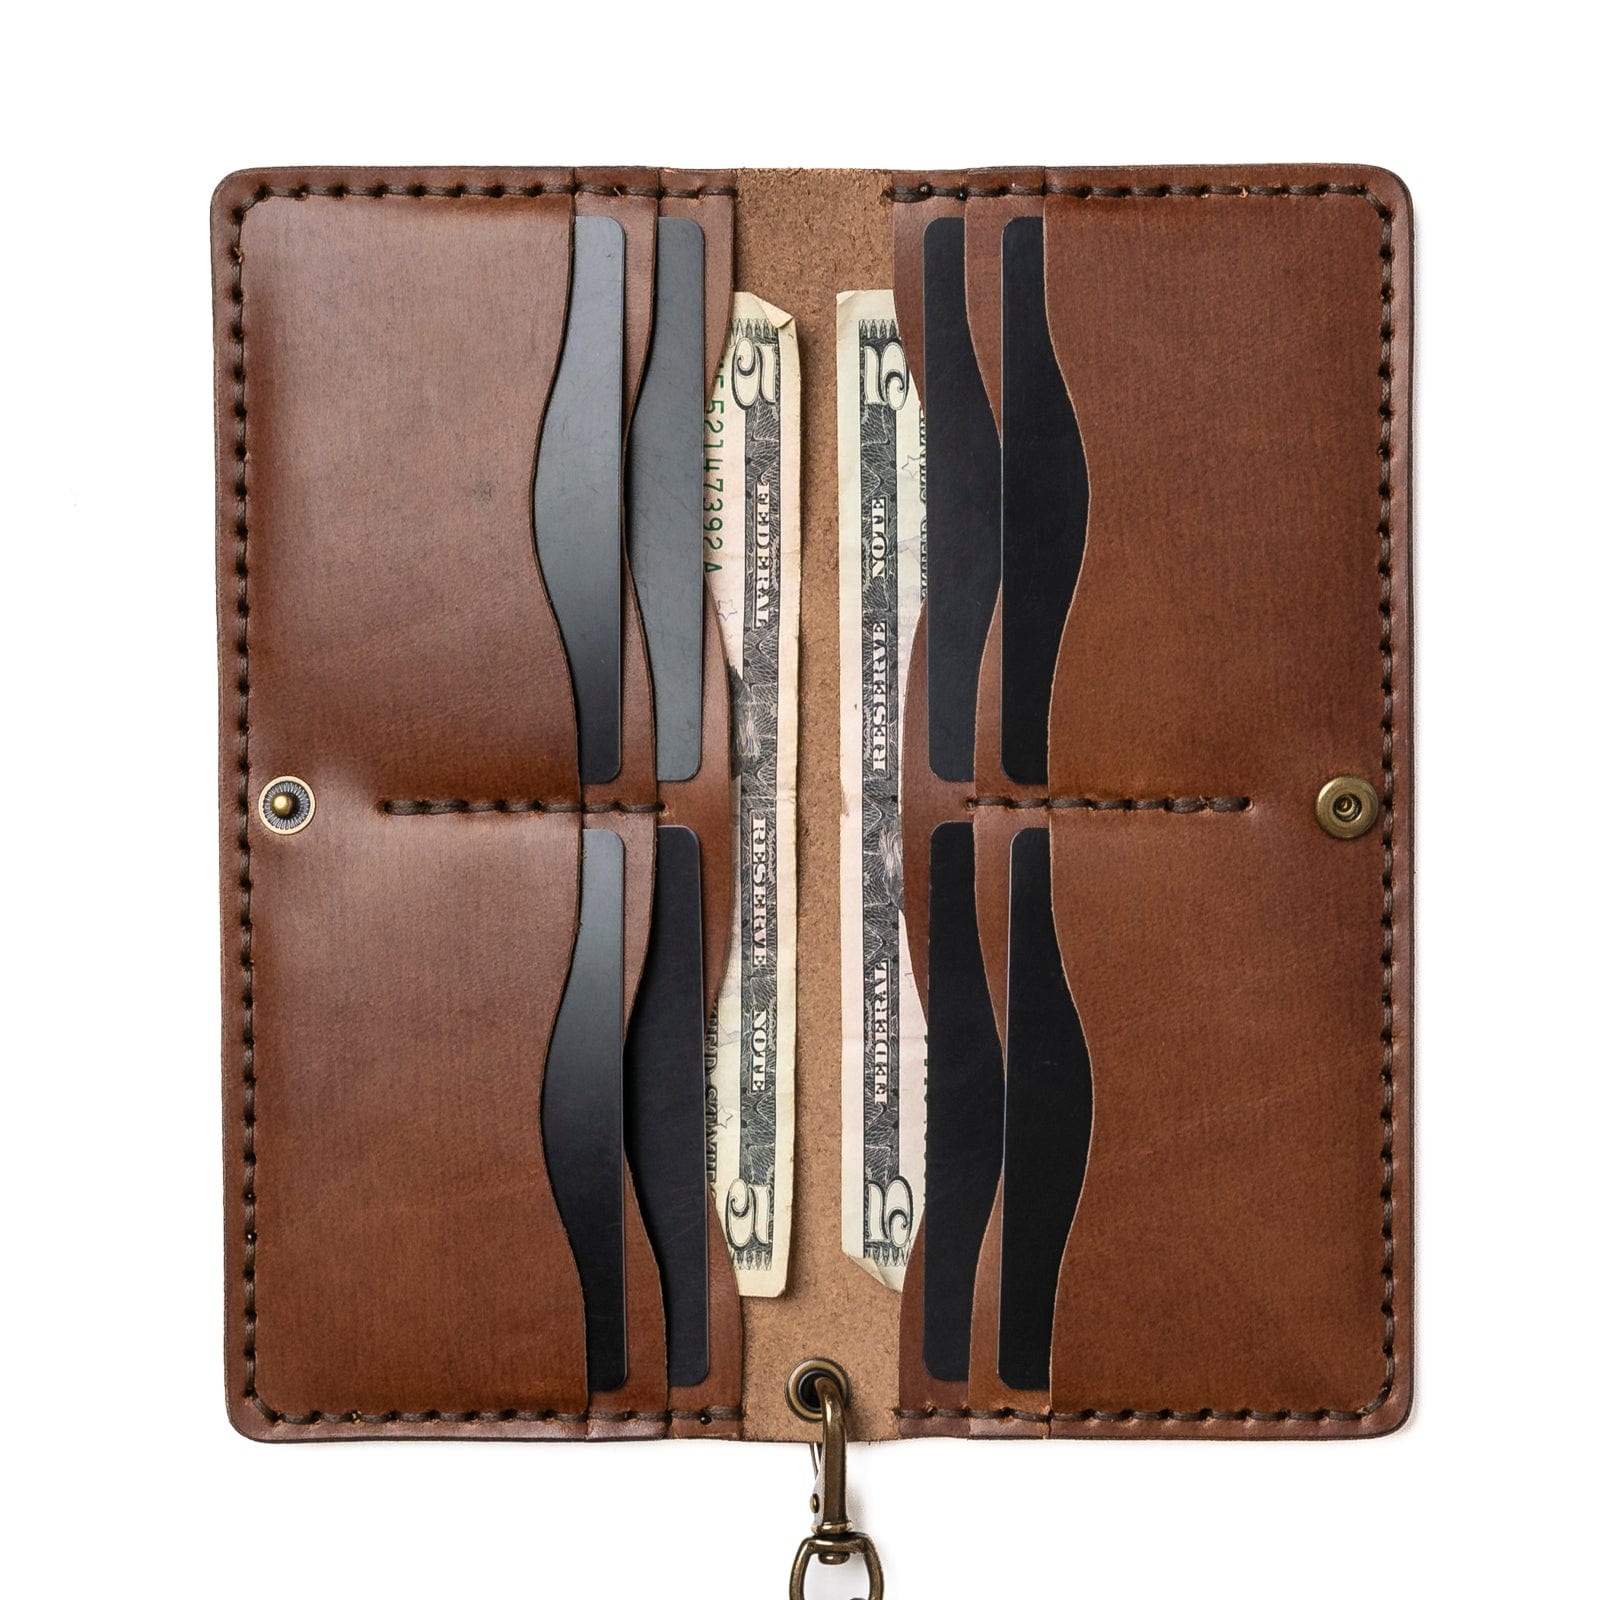 Full-Grain Leather Natural Long Wallet: Carry a Lot in Style 